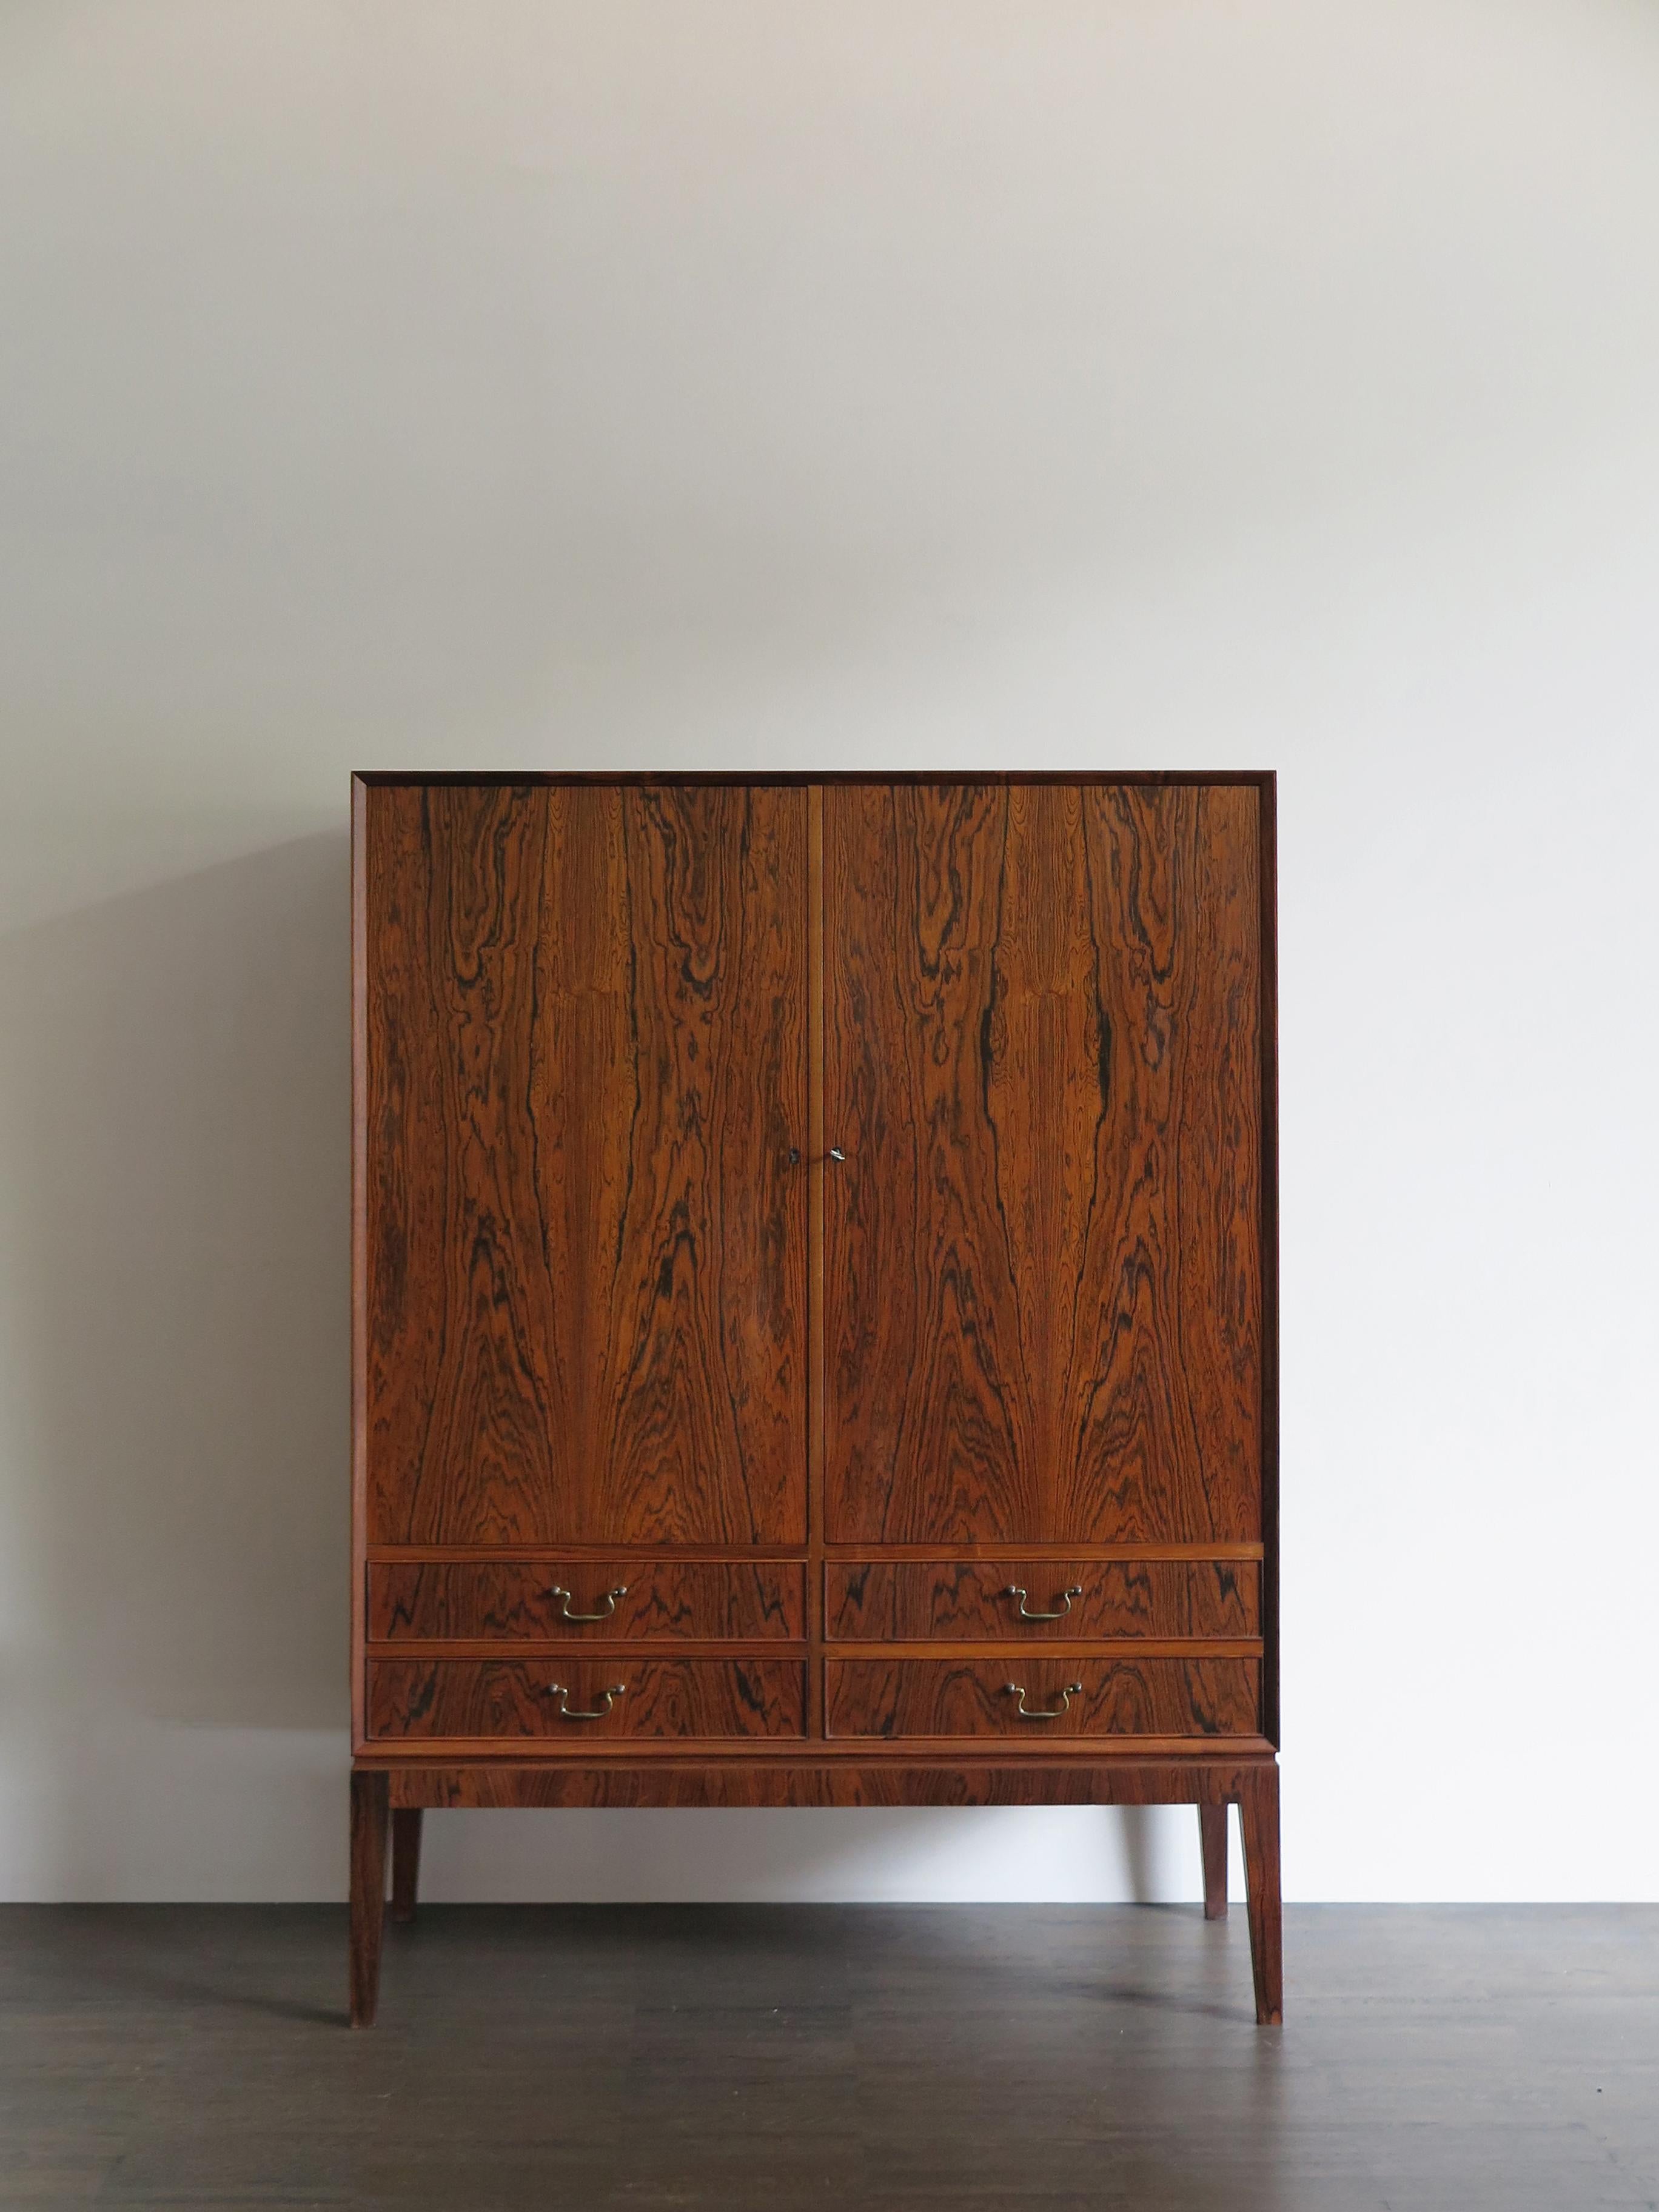 Scandinavian Mid-Century Modern design rosewood cabinet produced by O. Bank Larsen Møbelfabrik with fours drawers with brass handles and two doors, manufacturer’s adhesive label inside a drawer, Denmark 1960s.
Very clean and contemporary line and